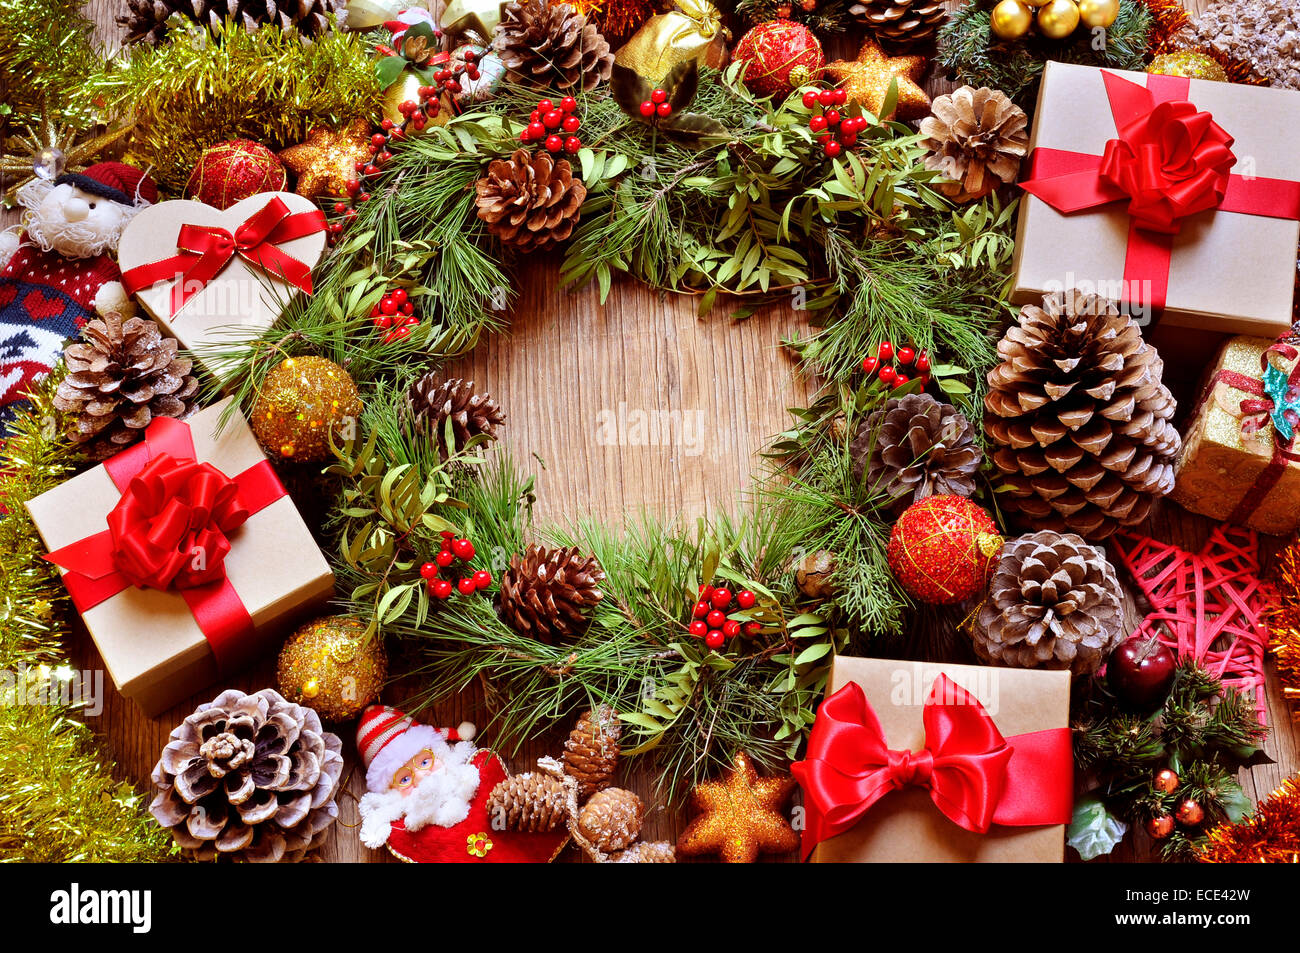 a rustic wooden table full of gifts, and christmas ornaments, such as a natural wreath with branches, berries and pine cones, or Stock Photo